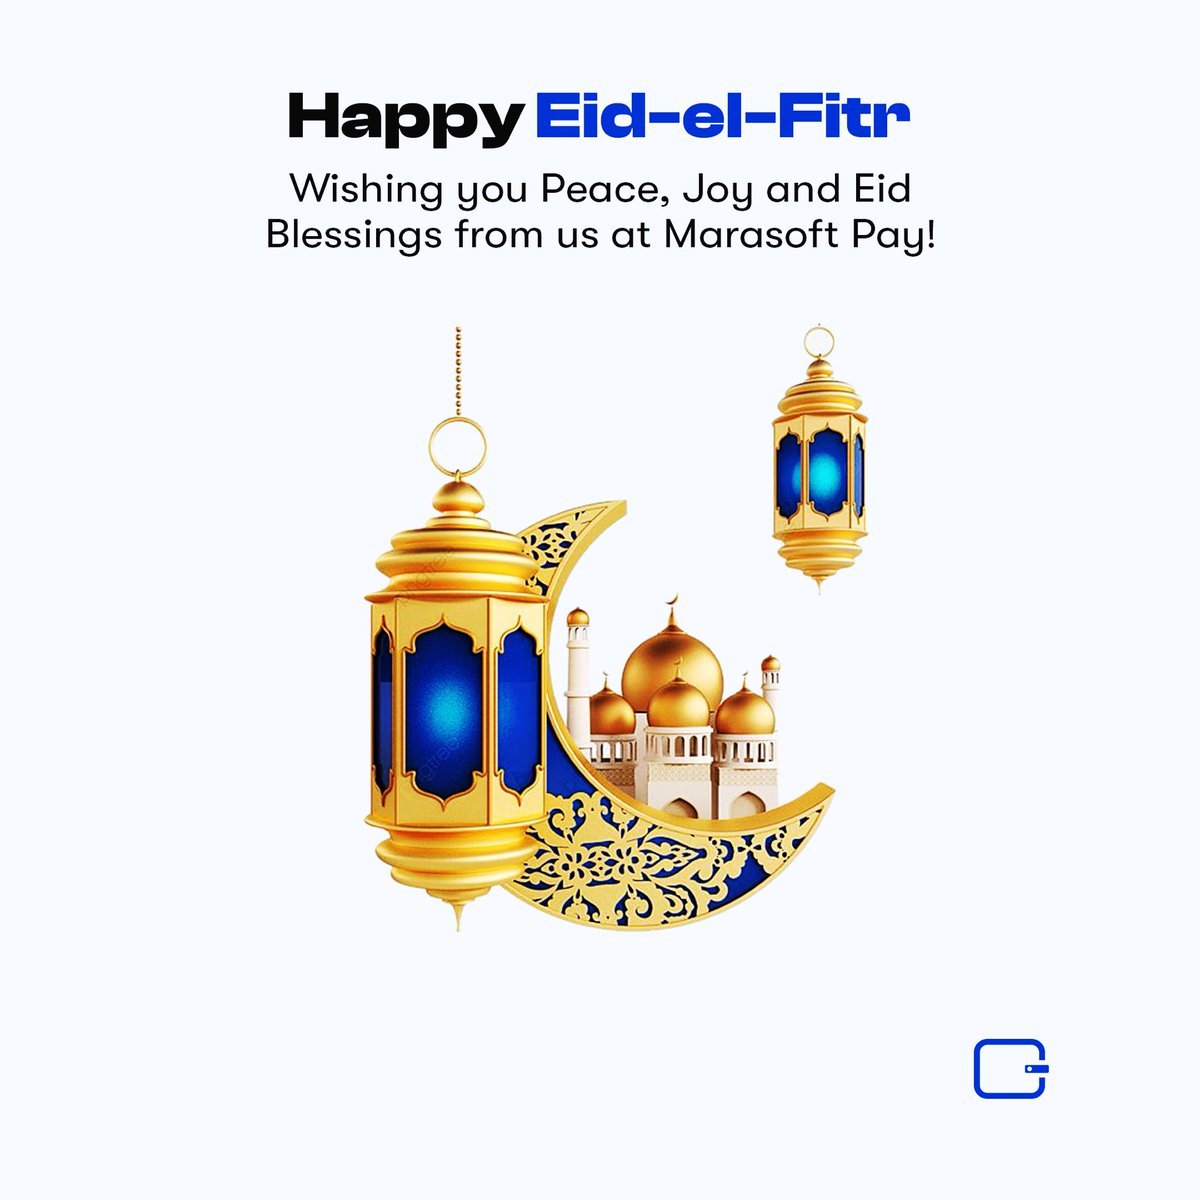 Happy Eid-el-Fitr to all our Muslim clients/ employees/friends.
Wishing you the blessings of this season and may Allah accept all your prayers. Have a wonderful celebration

#MarasoftPay #eidelfitr #allahswt